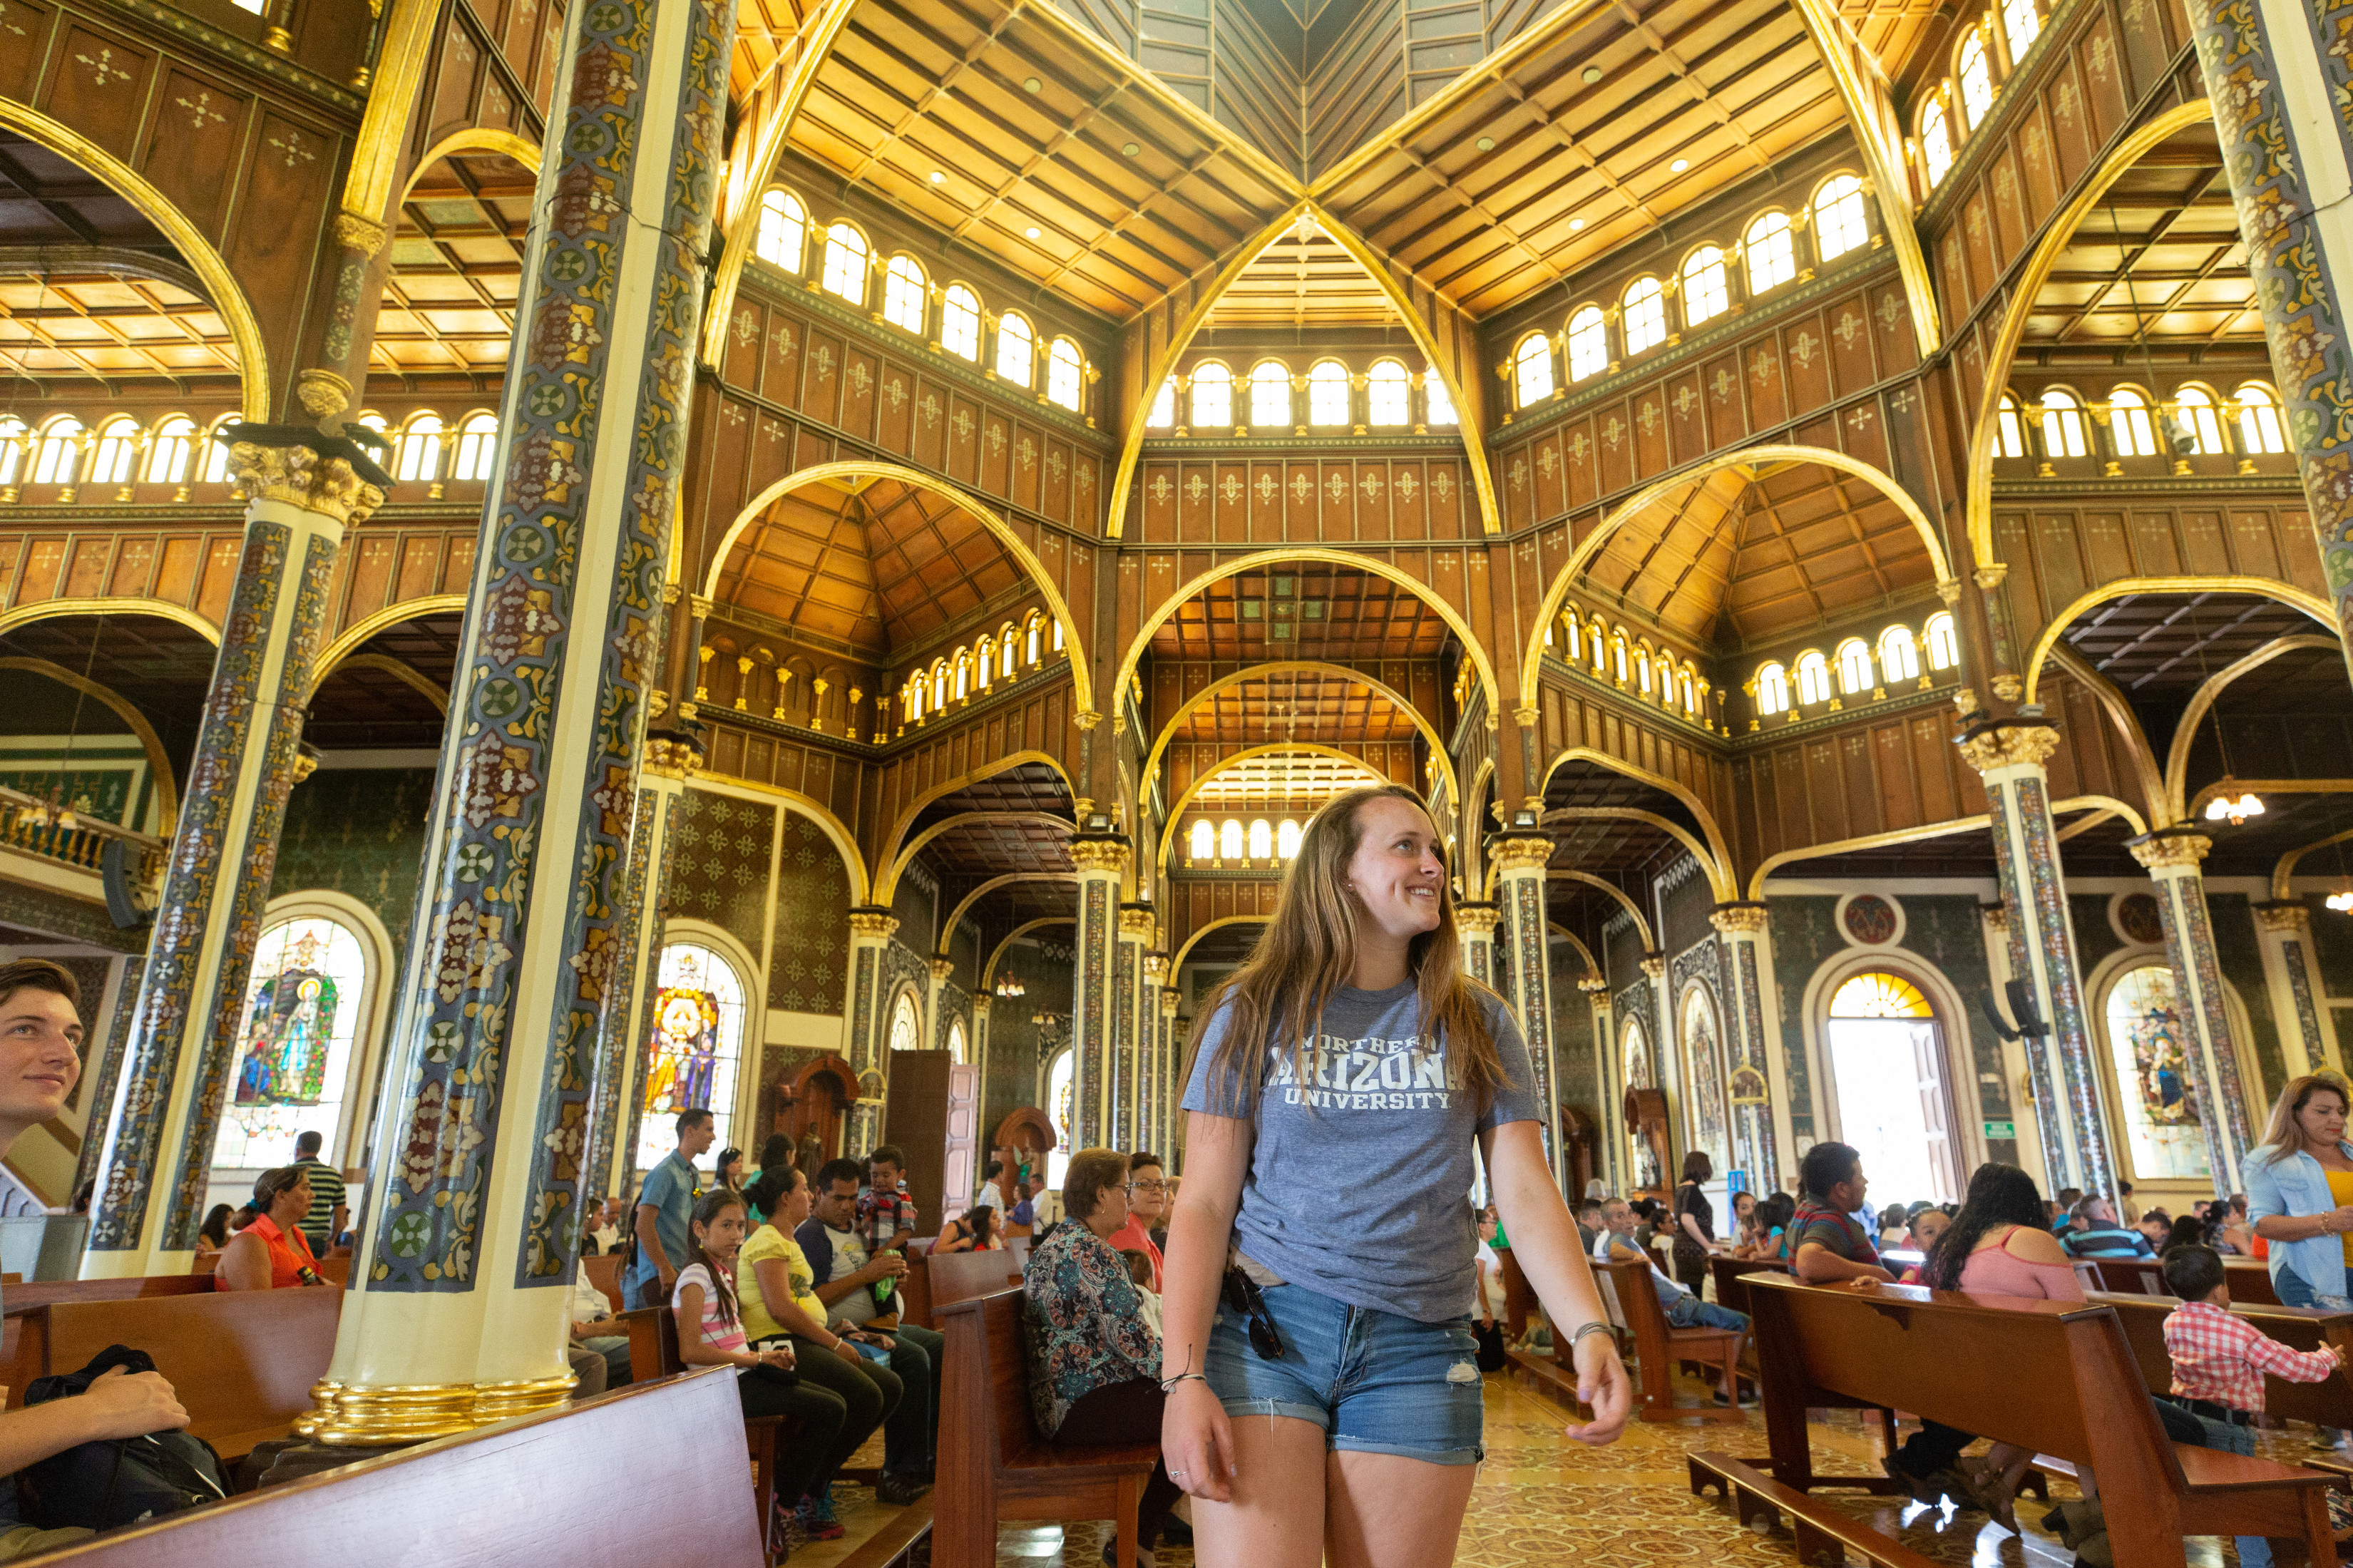 Student wearing 'Northern Arizona University' t-shirt in a large cathedral while traveling abroad.